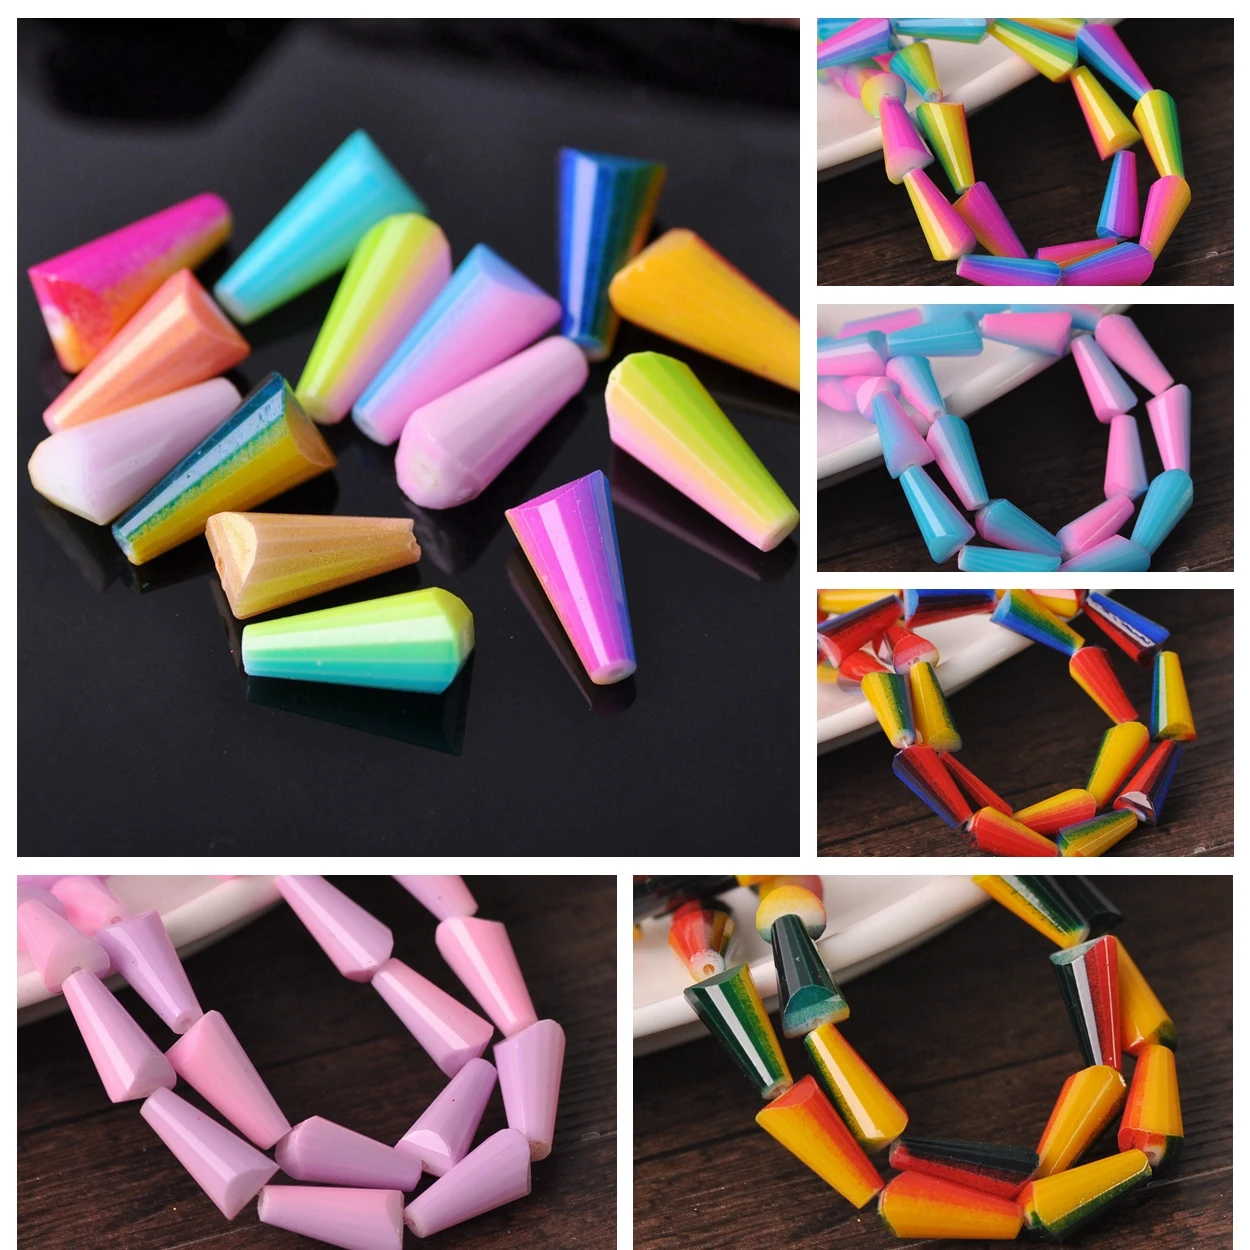 

2# 15x8mm Teardrop Cone Shape Faceted Patterns Coated Opaque Glass Loose Spacer Beads For Jewelry Making DIY Crafts